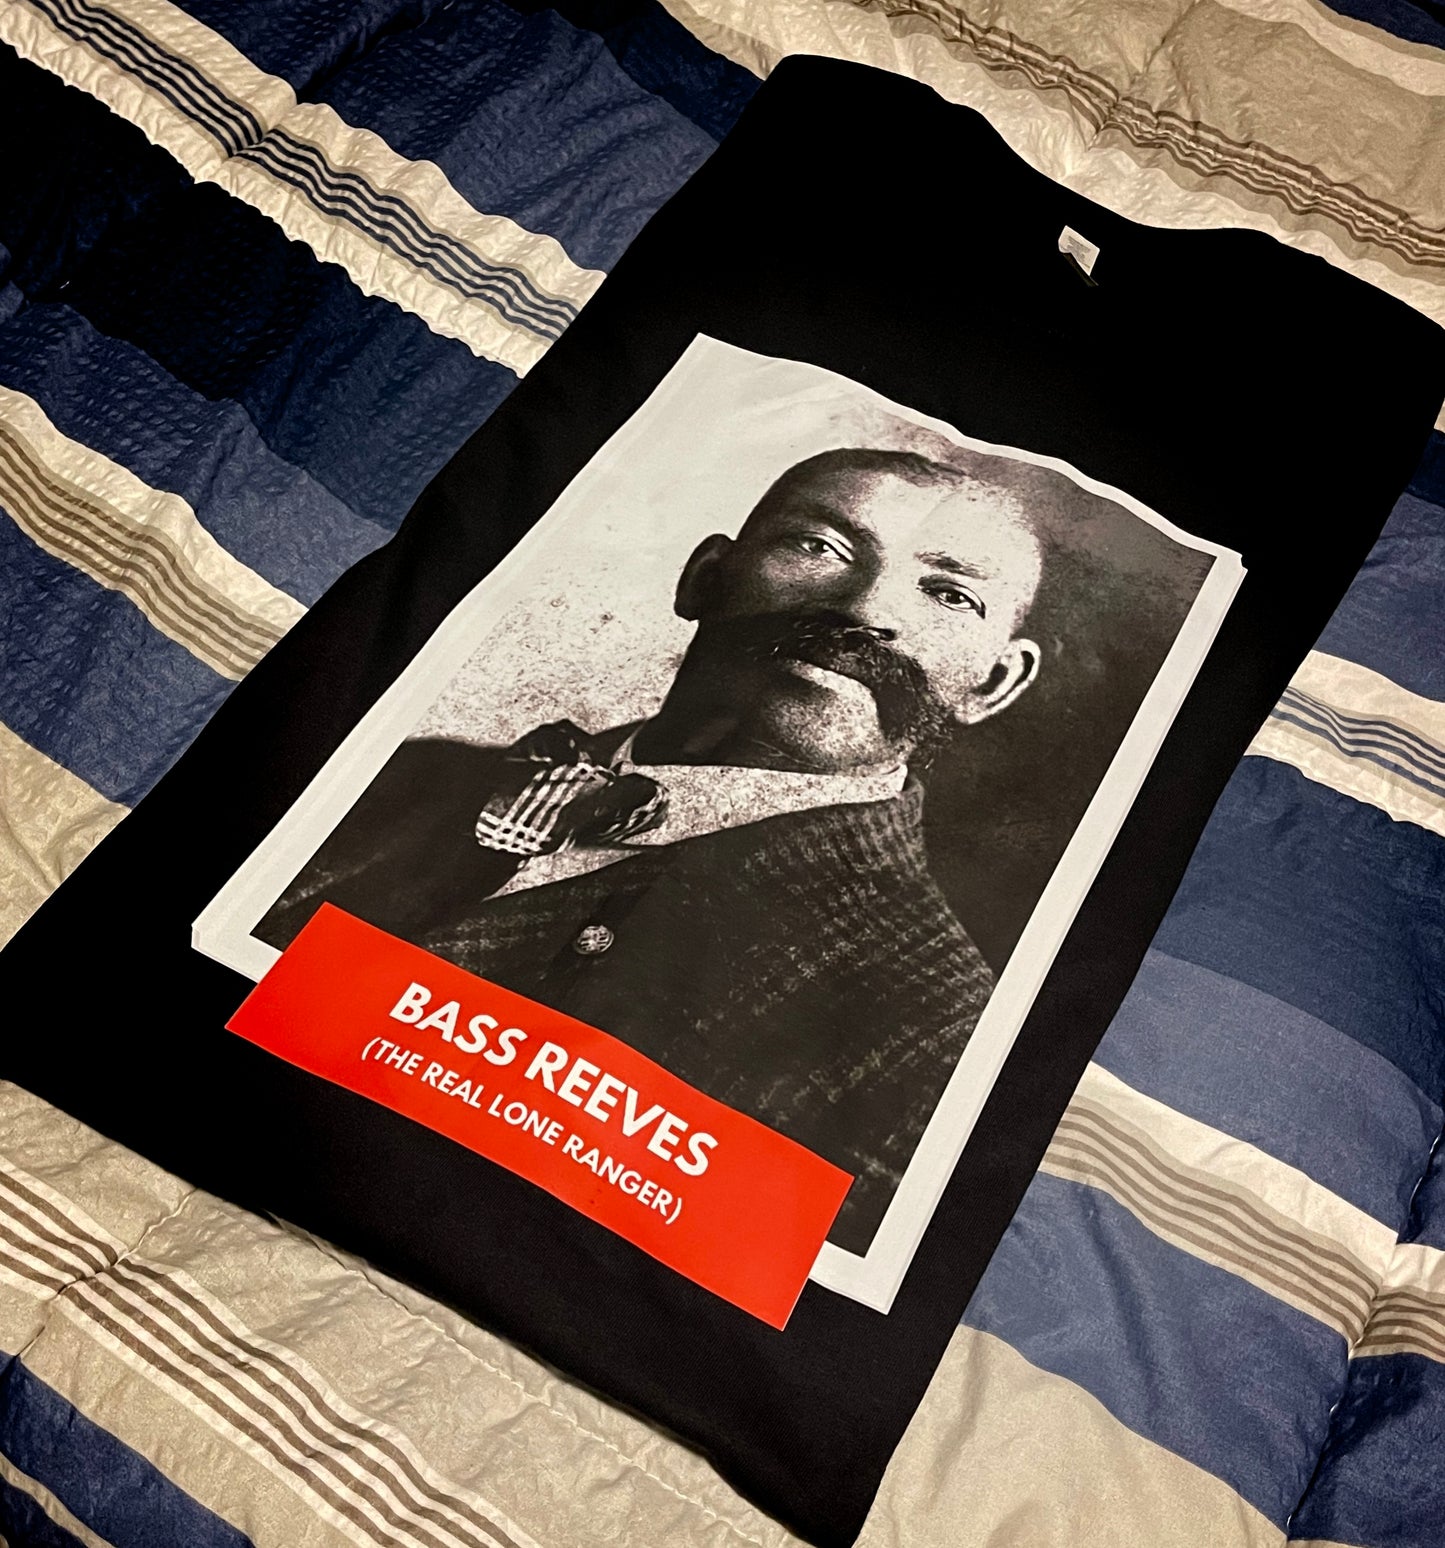 Bass Reeves - Black History Sweater